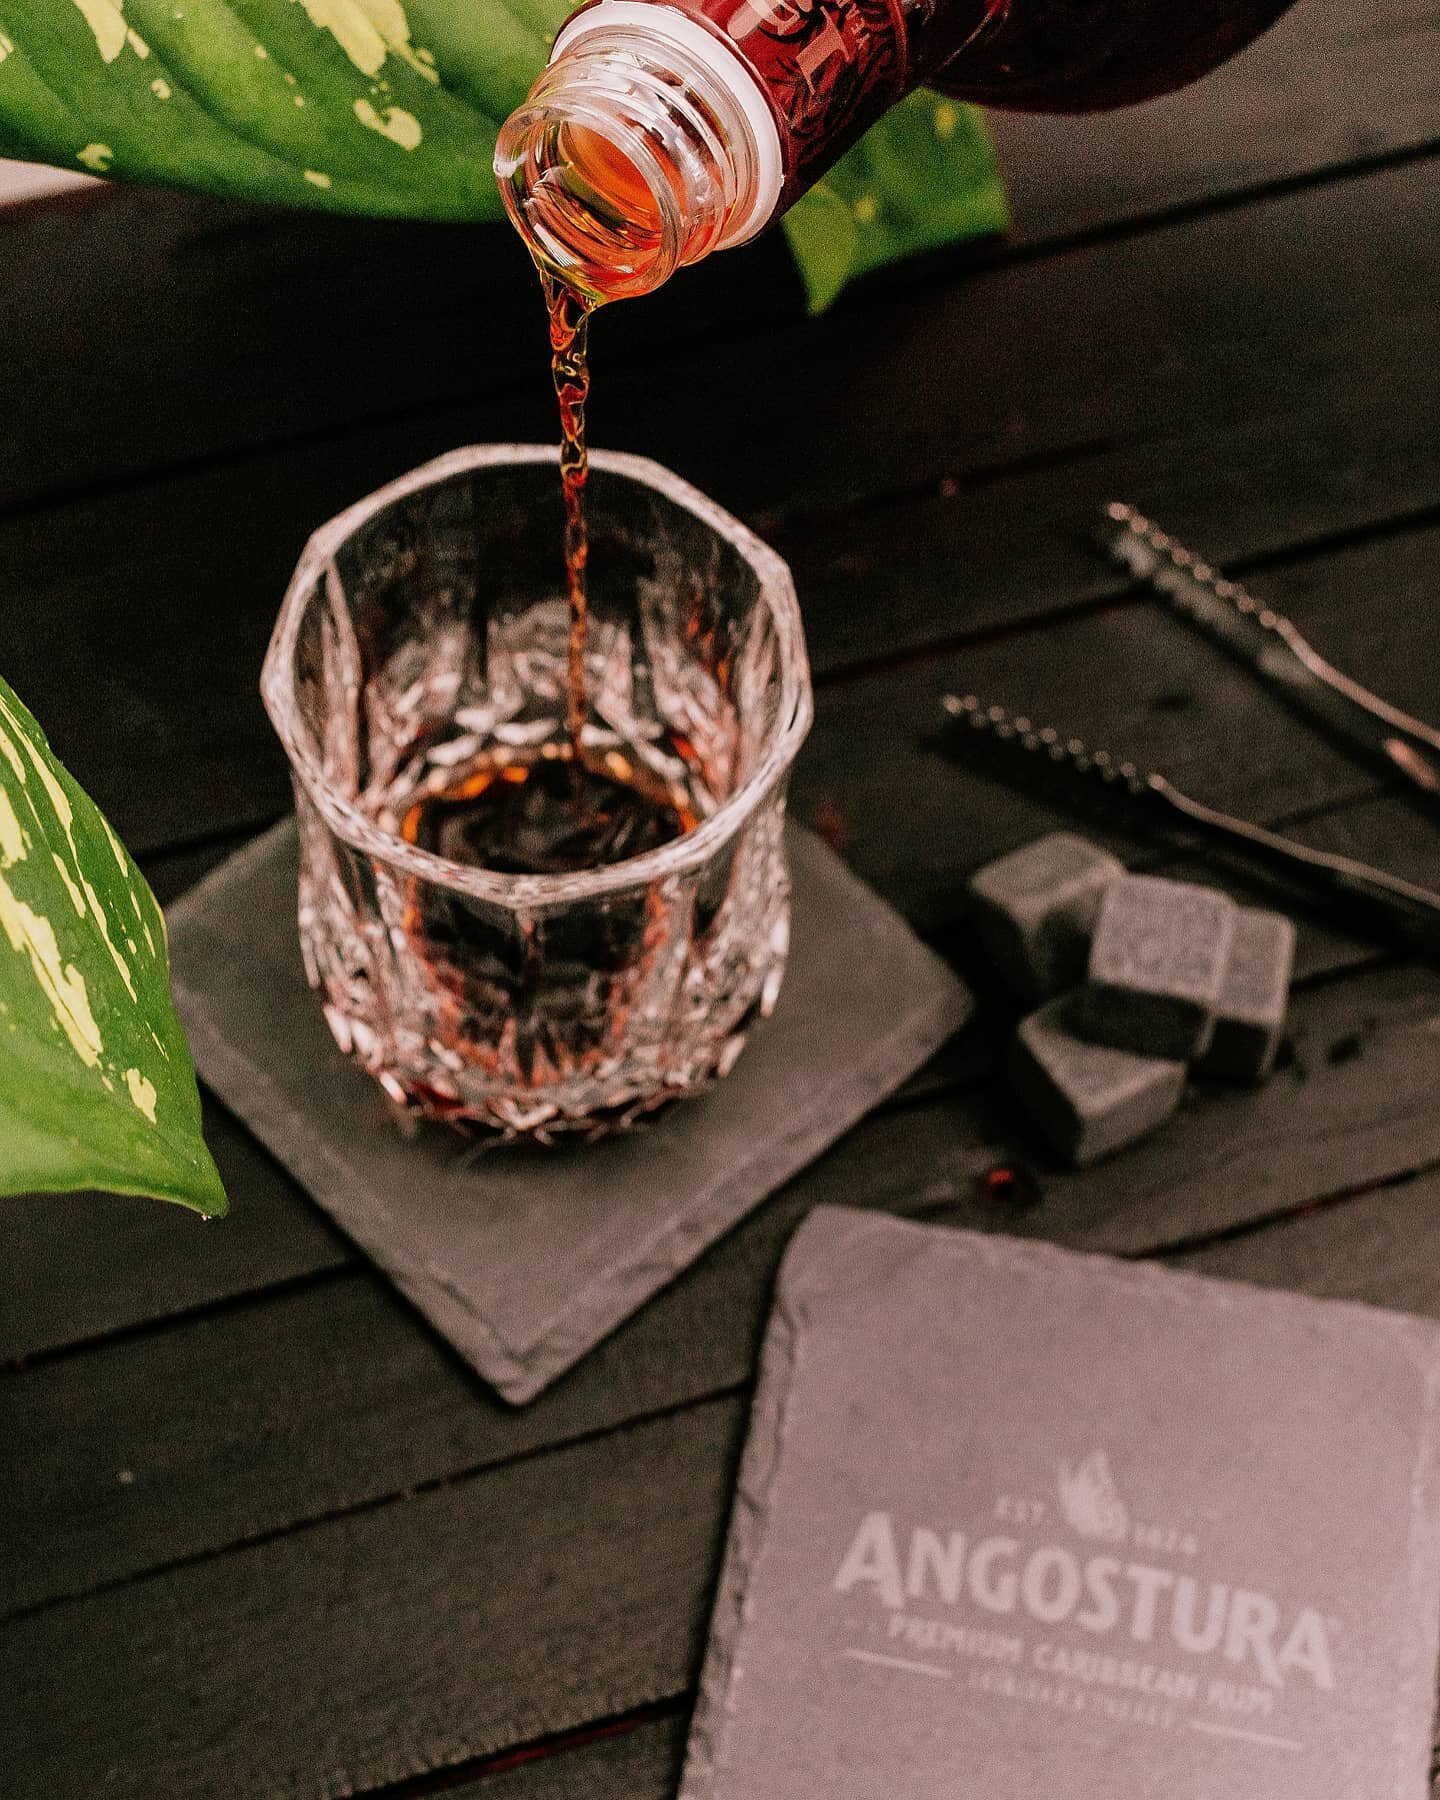 Chase? We don't do that here. (In best T'Challa voice)
But y'all should probably be following @adlabtt to see #bts for more of these.

#angostura #houseofangostura #premiumrum #1824 #moodygrams #creativecaptures #creativelockdown #agameoftones #darka